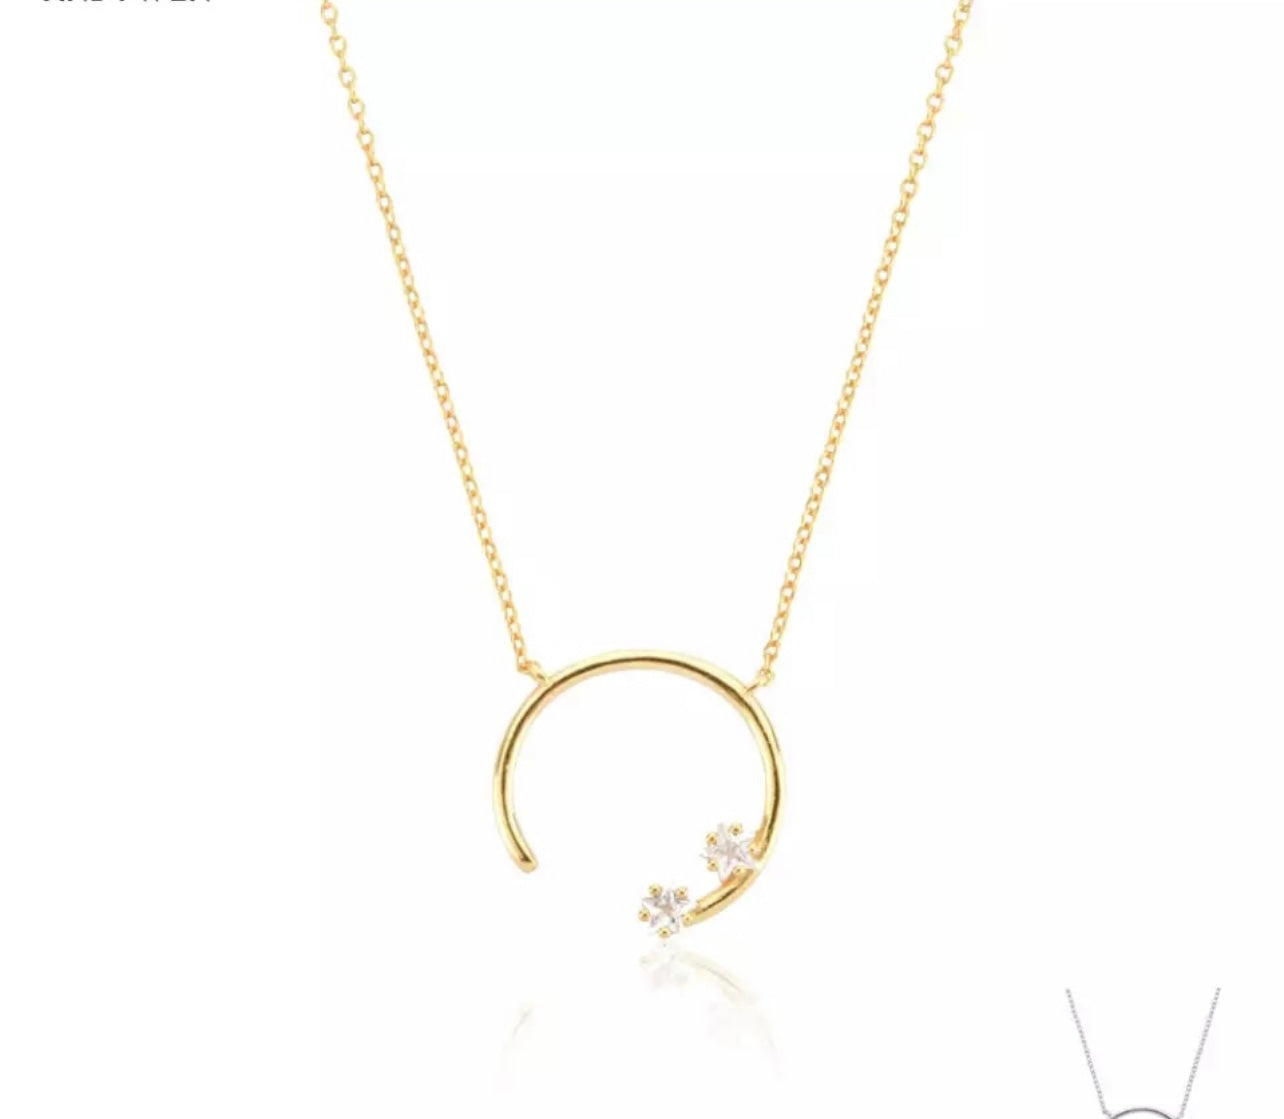 LANA I Cresent Necklace I S925 Sterling Silver I 18ct Gold/Platinum Plated I Cubic Zirconia